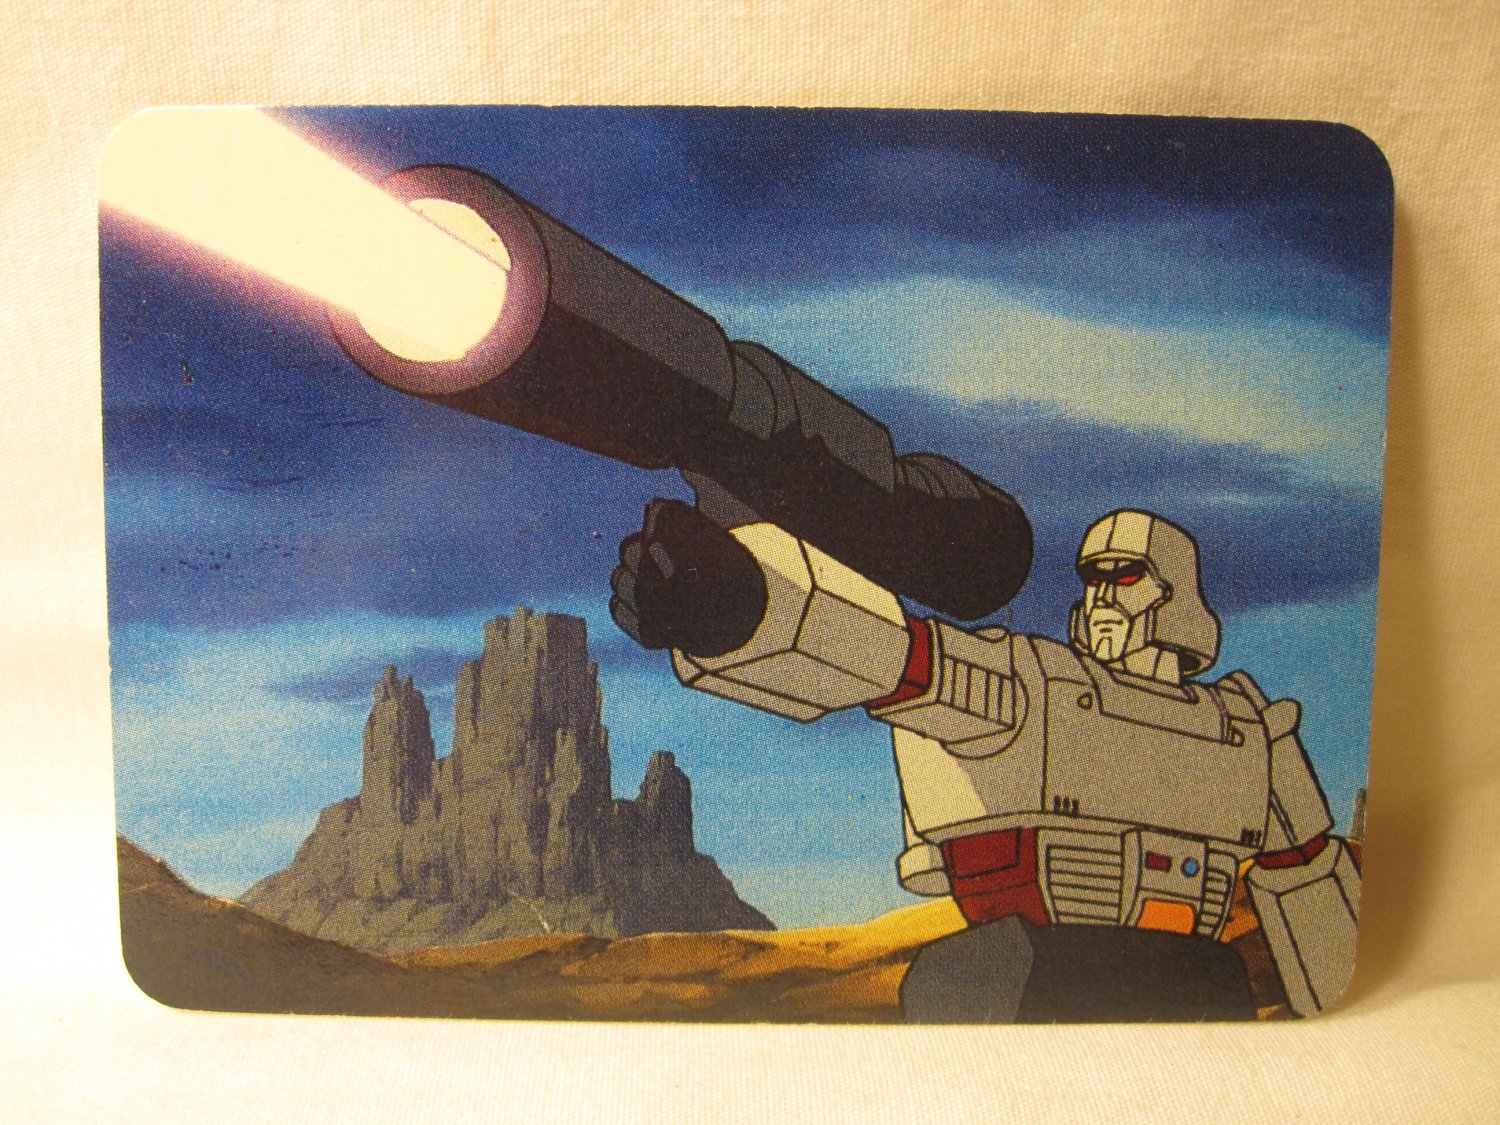 1985 Transformers Action trading card #140: A Megatron Blast